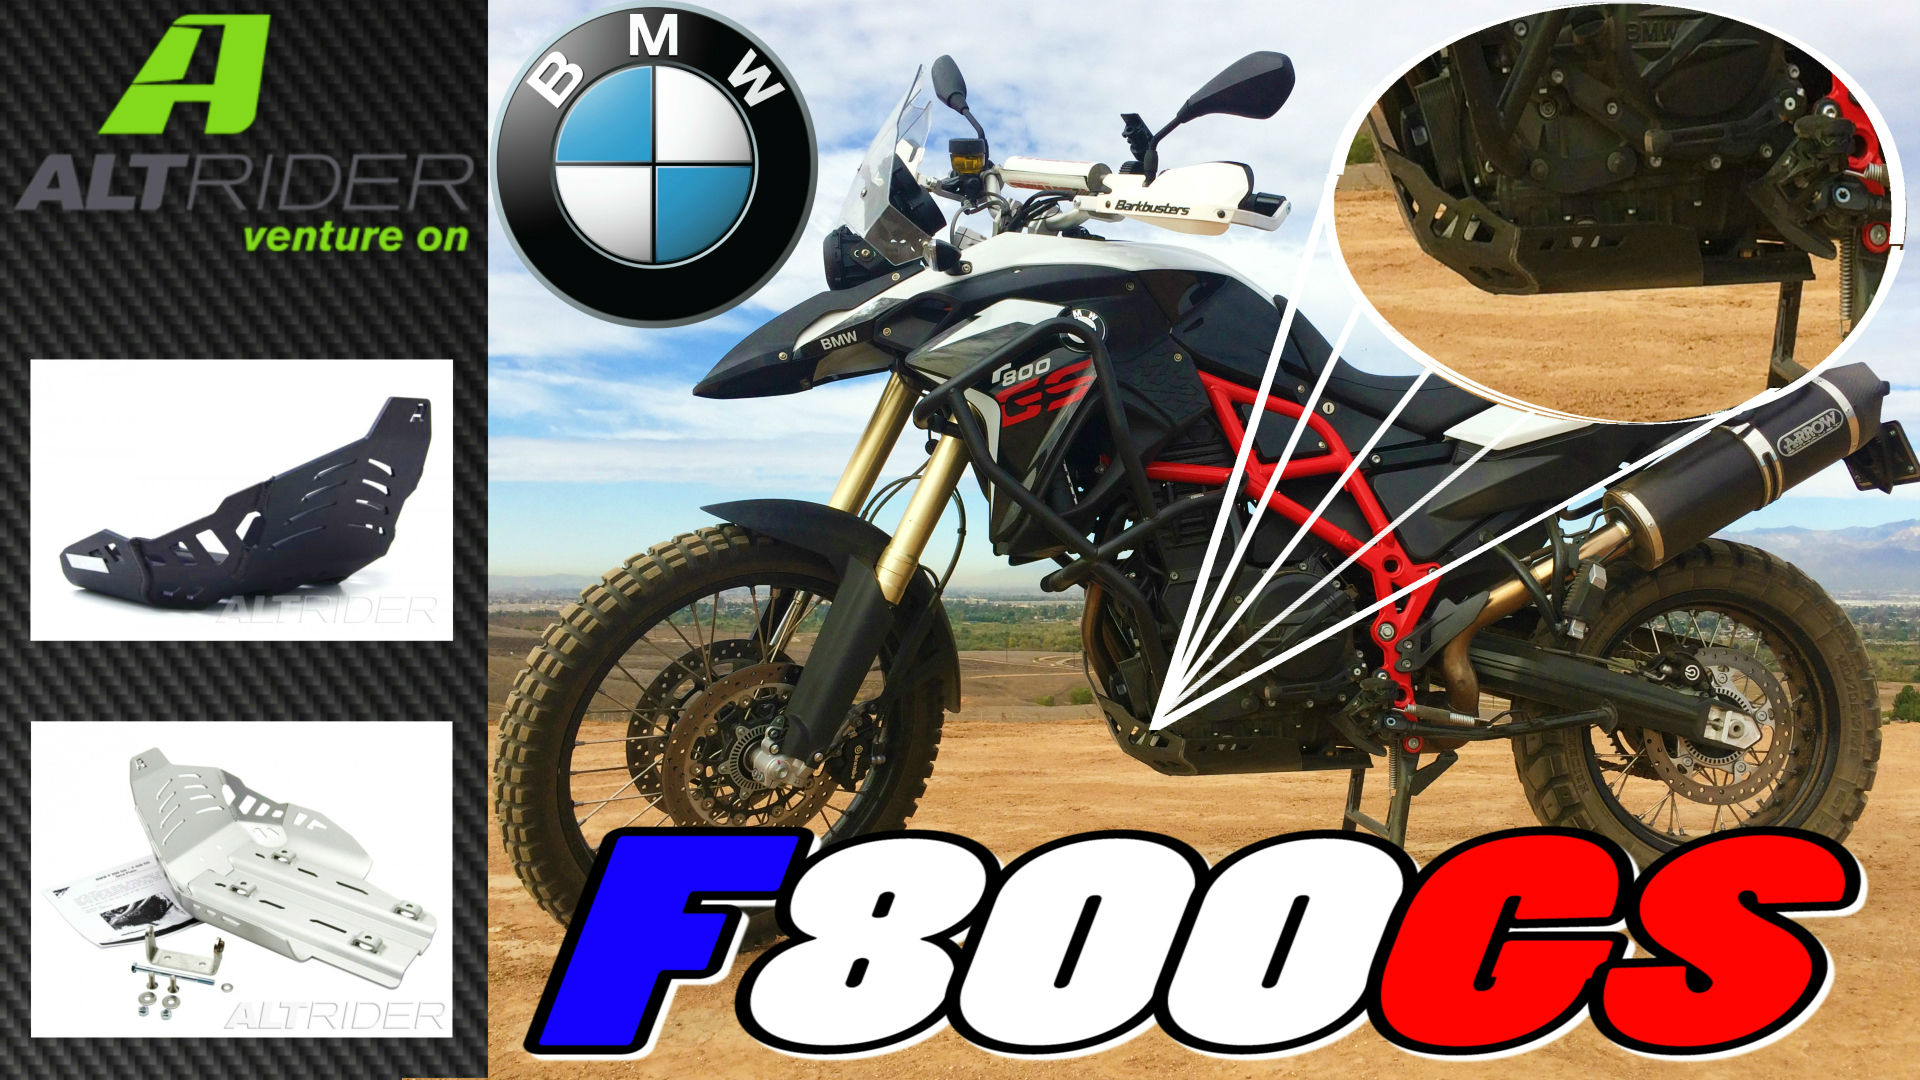 AltRider, Skid, Plate, BMW, F800GS, Adventure, touring, BMW GS Parallel-twin, skid plate, skidplate, bash plate, bashplate, review, installation, offroad, off road, dualsport, dual sport, adventure touring, motorcycle, sumpguard, Sump Guard, Accessories, ADV, Dirt Bike, Off-Road, Adventure Riding, Adventure Motorcycle, GS, albe's adv, albe's review, albe's maintenance, albes, bmw f800gs, f 800 gs, bmw f800gs accessories, motorcycle accessories, adventure bikes, bmw motorrad, motorrad,